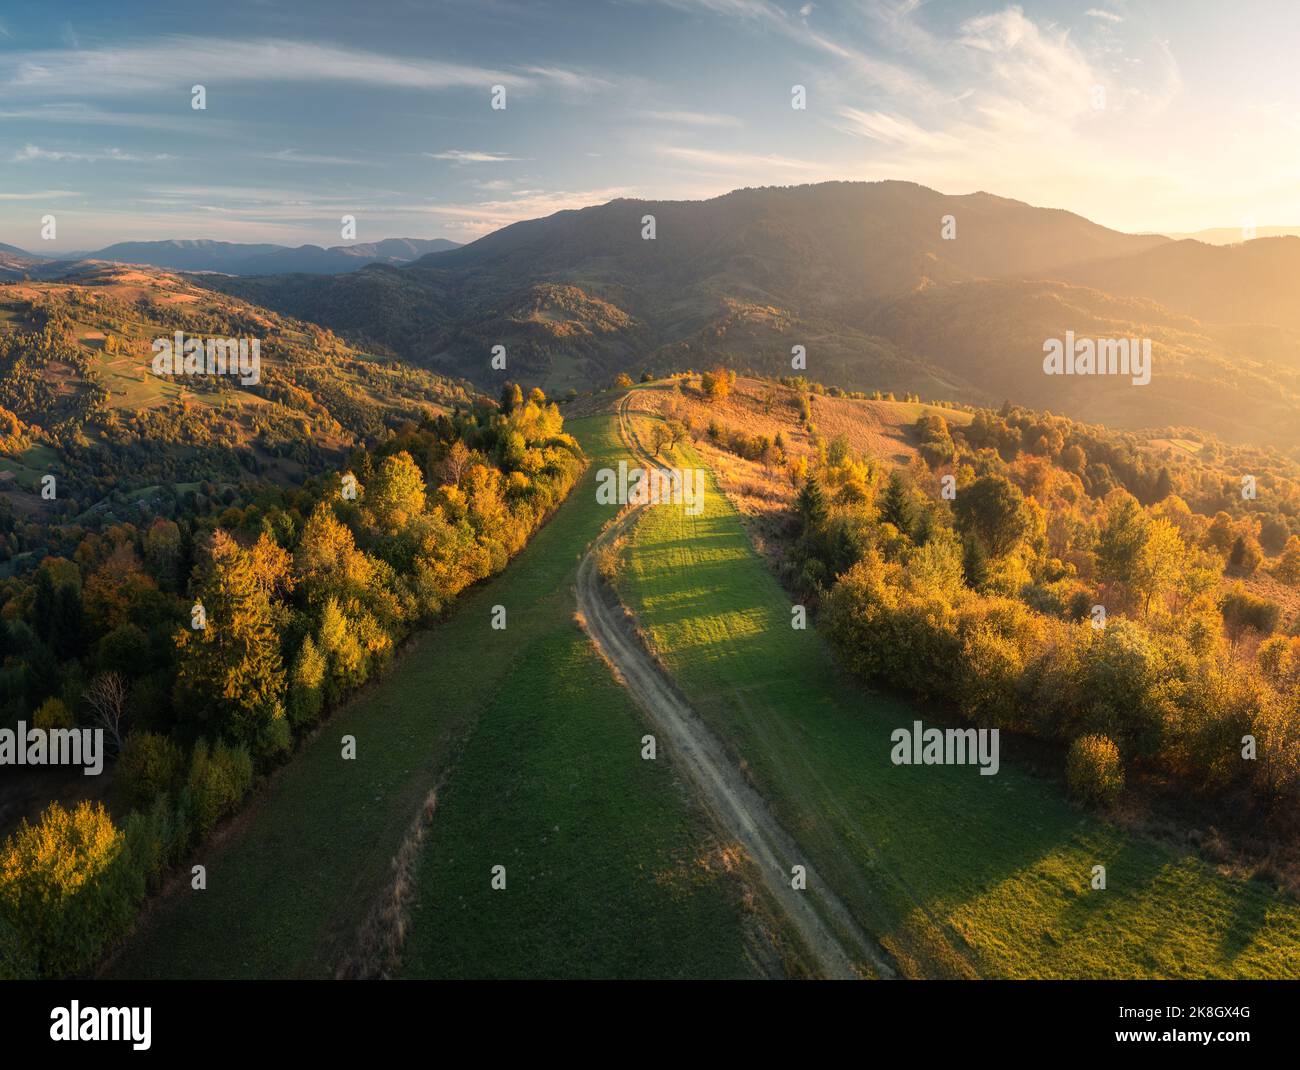 Aerial view of green hills, forest and mountains in autumn Stock Photo